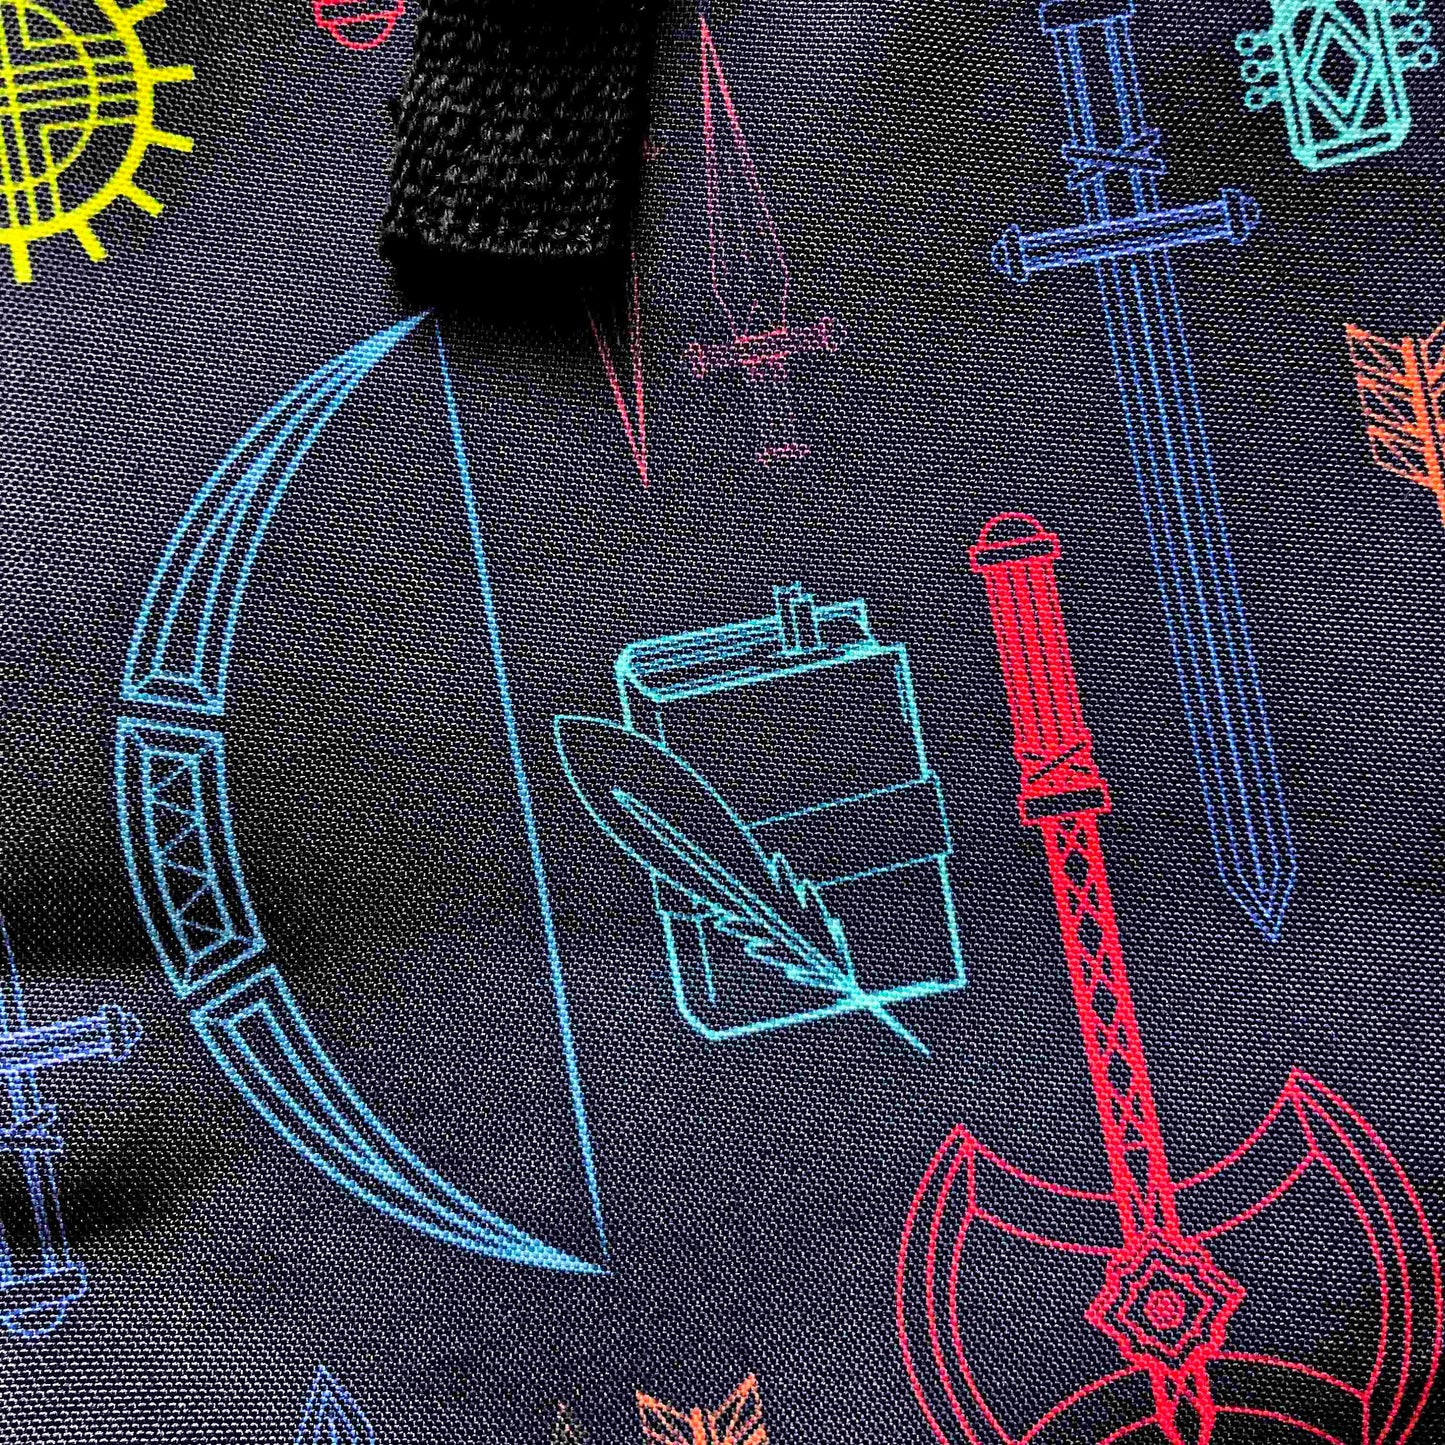 D&D Weapons Tote Bag